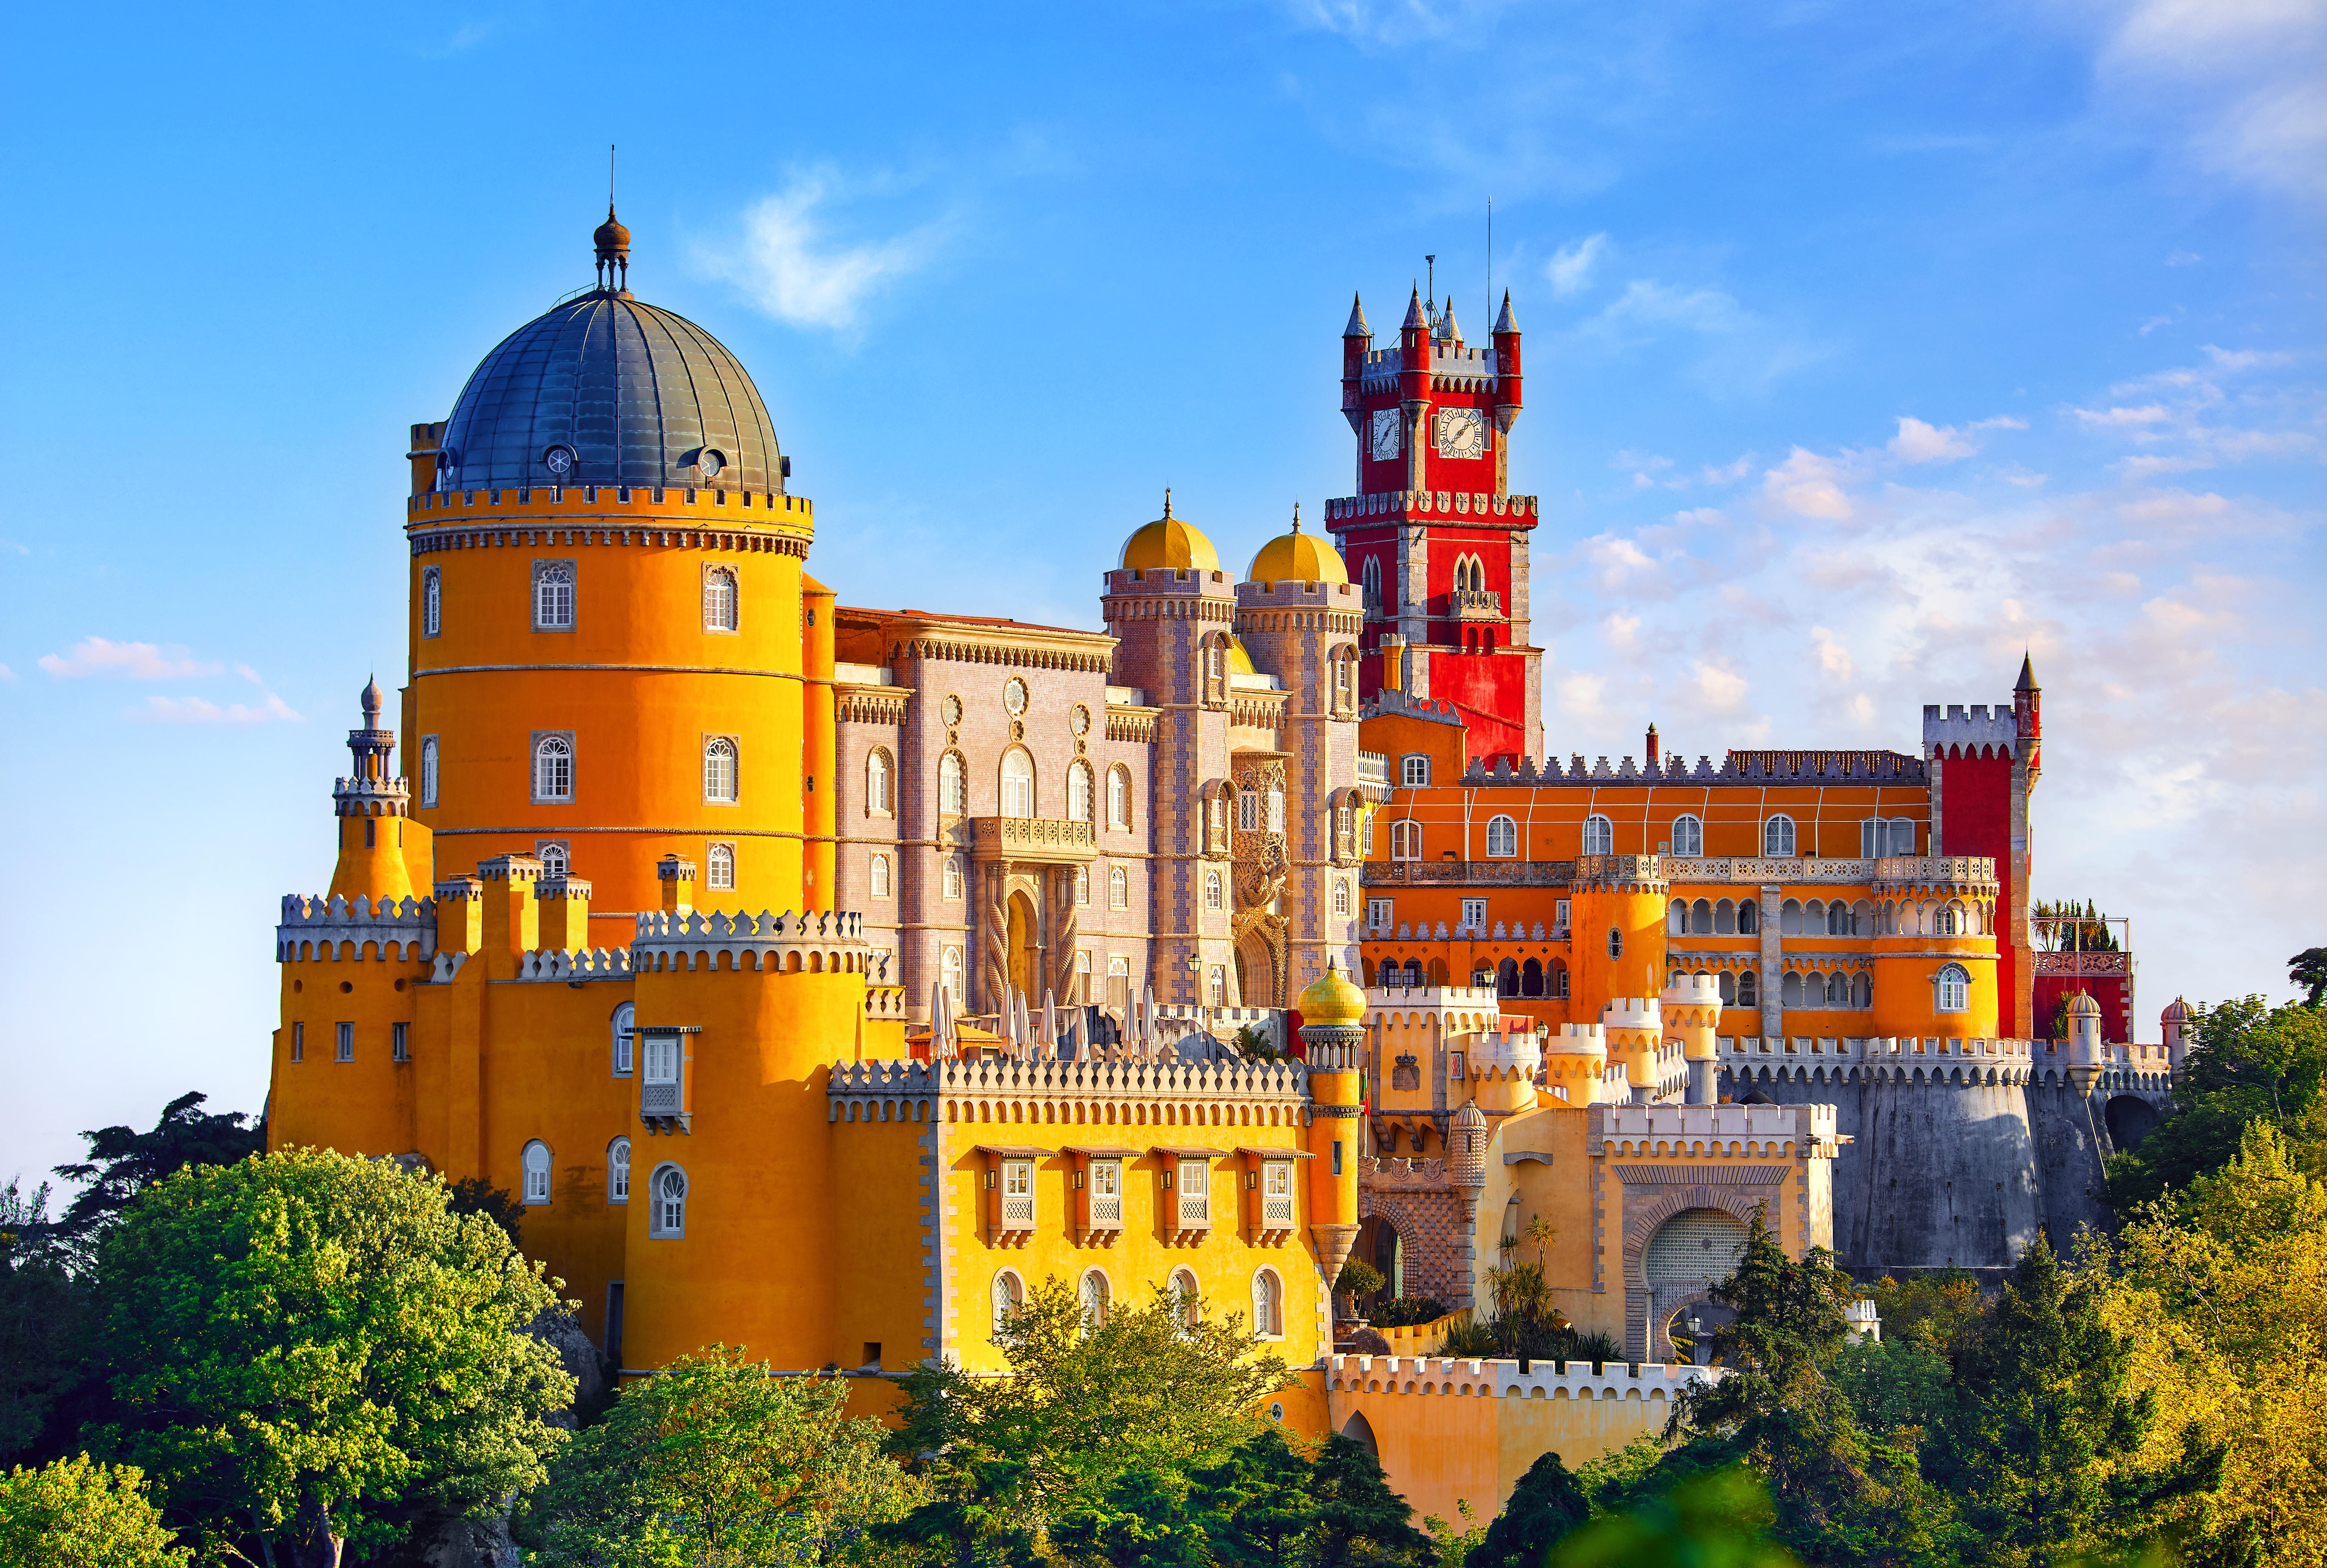 Visiting the Colourful Pena Palace in Sintra - April Everyday